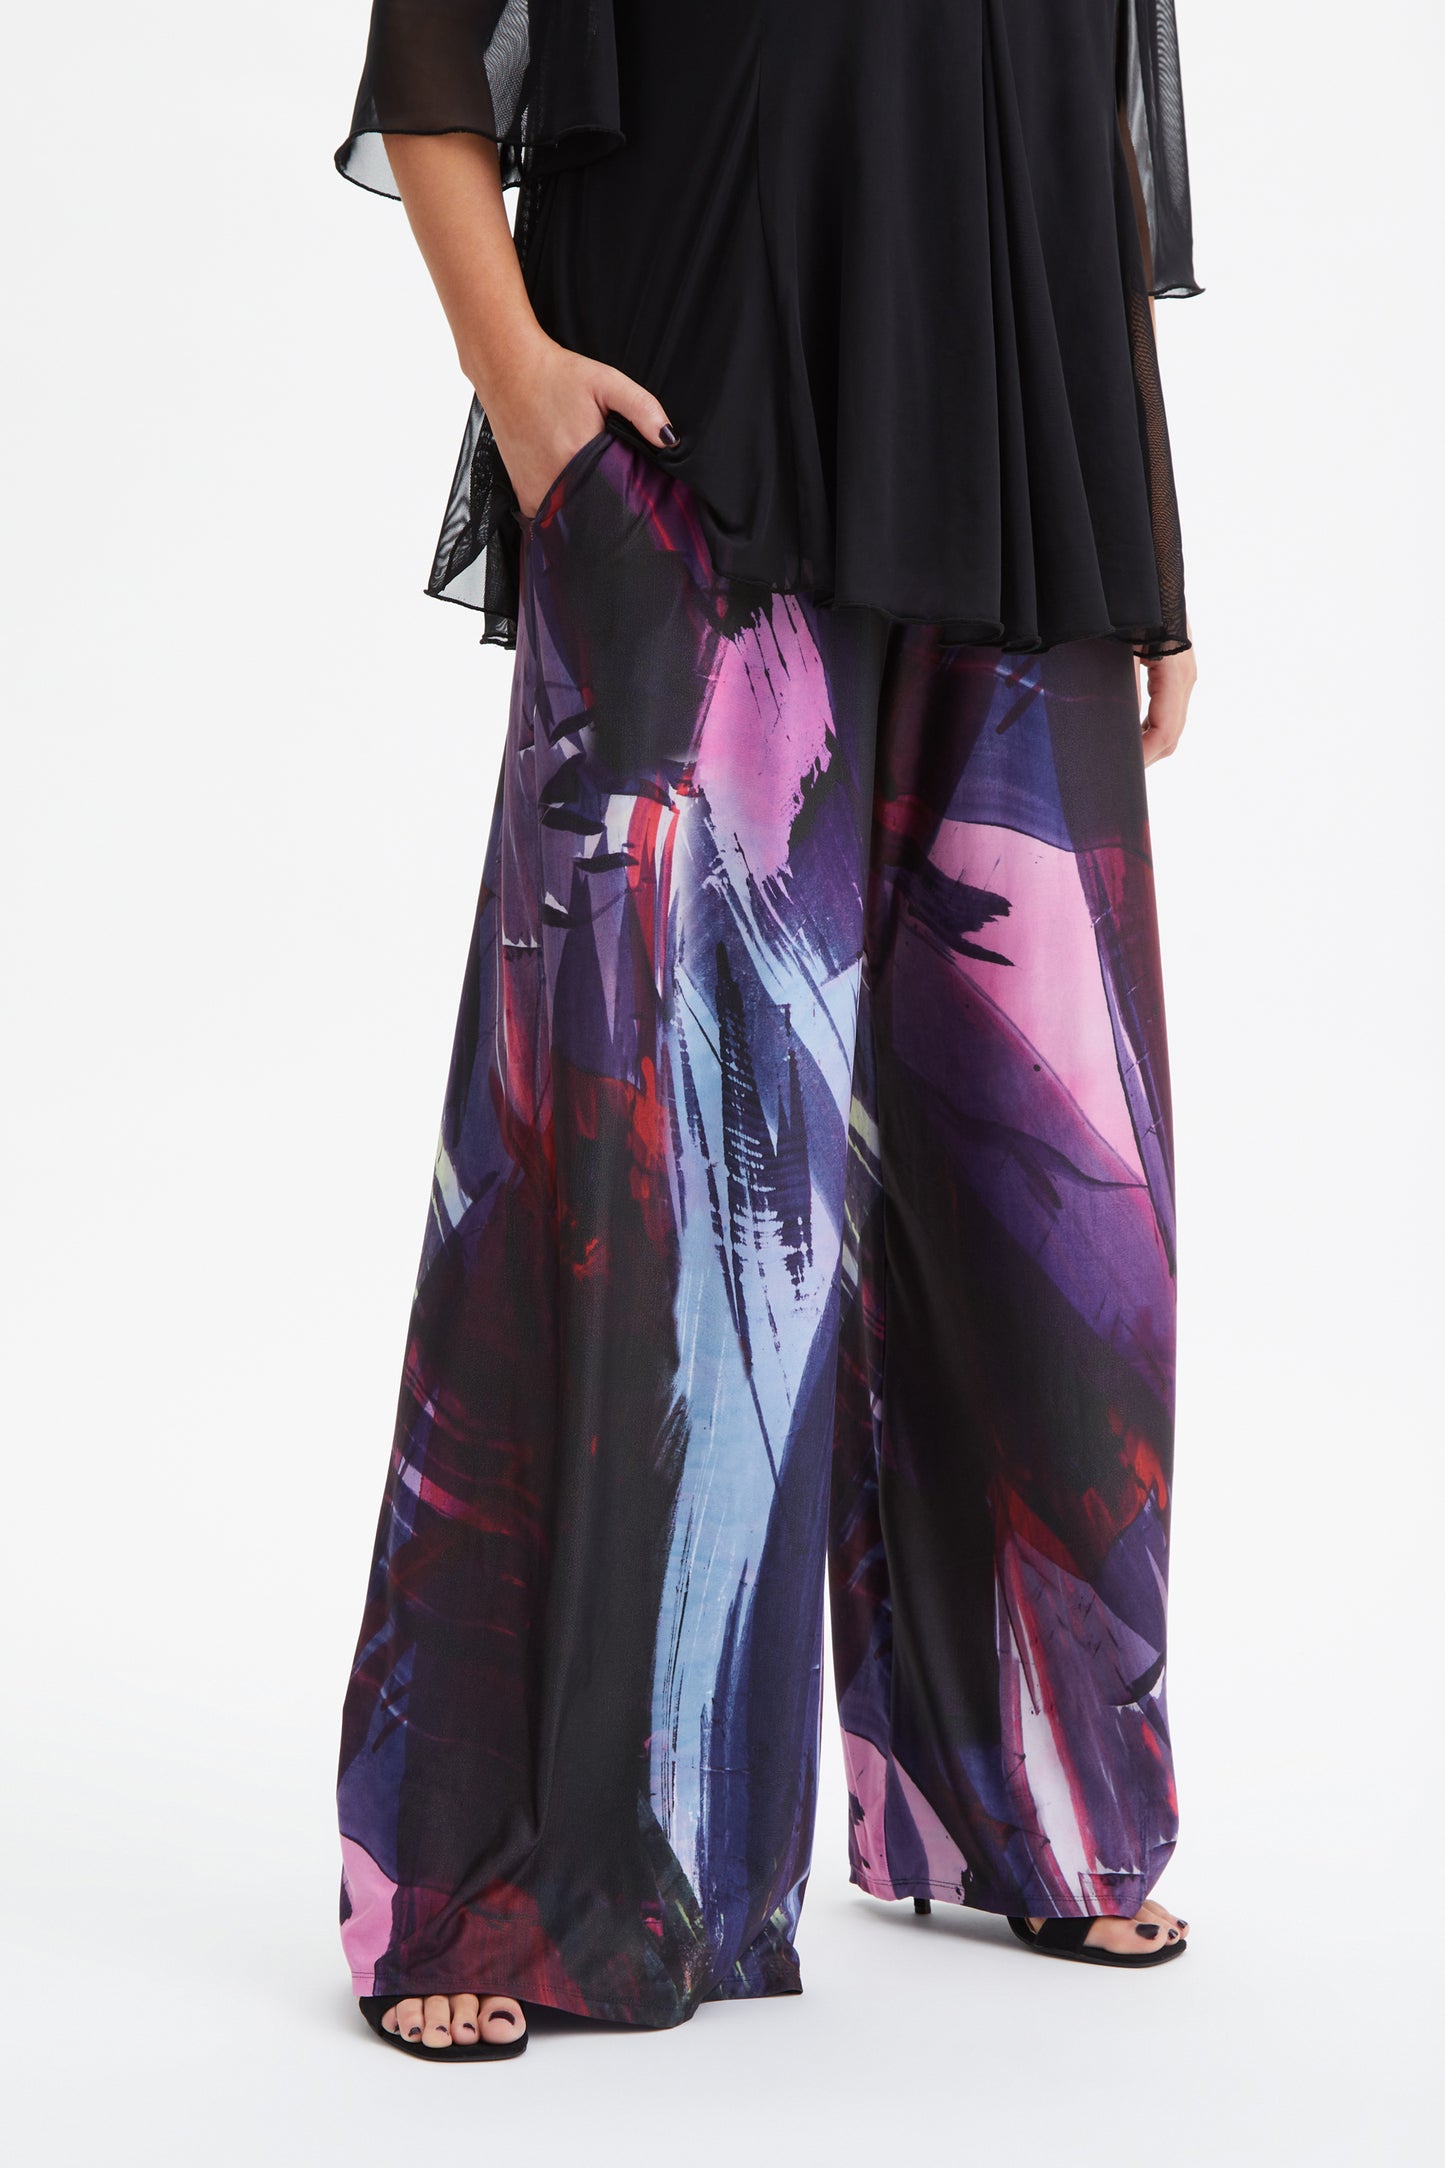 The Black Abstract Bette Lounge Pant